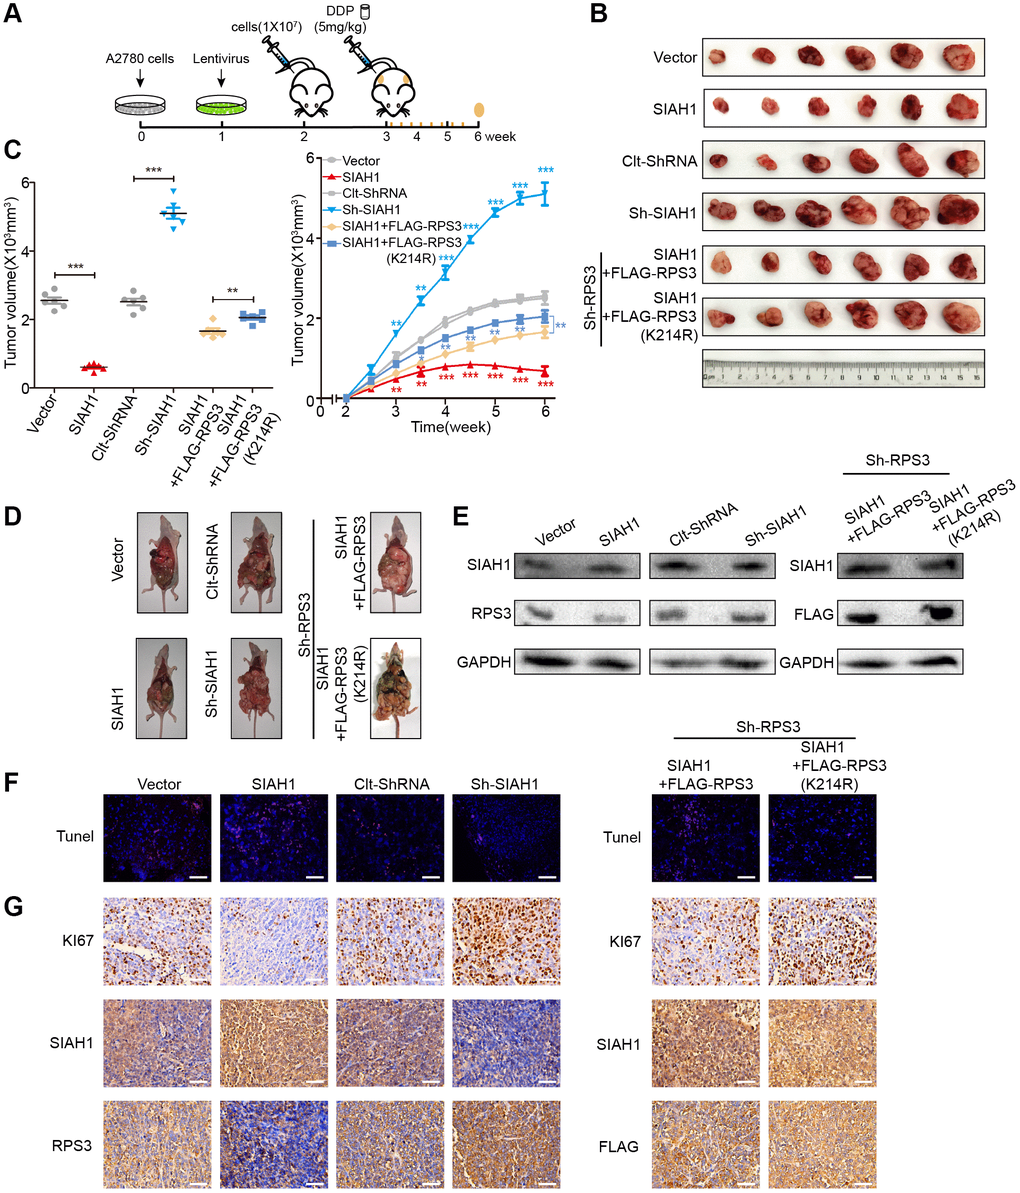 SIAH1 enhances the sensitivity of ovarian cancer cells to cDDP by down-regulating RPS3 in vivo. A2780 cells were transfected with Vector, SIAH1, Clt-shRNA, sh-SIAH1, SIAH1+FLAG-RPS3 and SIAH1+FLAG-RPS3 (K214R) lentivirus and were then subcutaneously and intraperitoneally injected into female BALB/c nude mice, and potential tumours were allowed to grow for one week (n = 6). All the groups were administered DDP (5 mg/kg) by intraperitoneal injection three times a week for a total of 8 times before sacrifice. (A) Flow chart of the animal experiment. (B) Representative images of the excised tumours on day 35 after tumour cell injection. (C) Tumour volumes of the excised tumours on day 35 (left) and the tumor growth curves (right) after tumour cell injection. (D) Typical pictures of tumours in the abdominal cavity after intraperitoneal injection in each group of mice. (E) The levels of SIAH1 and RPS3 proteins in mouse xenograft tumour tissues were assessed by Western blotting. (F) The apoptosis level of tumour tissue in each group was detected by TUNEL assay. Scale bar: 100 μm. (G) Immunohistochemistry analyses for KI67, SIAH1, RPS3 and FLAG staining were carried out with A2780 xenograft tumour sections. Representative staining is shown. Scale bar: 100 μm. **p ***p 